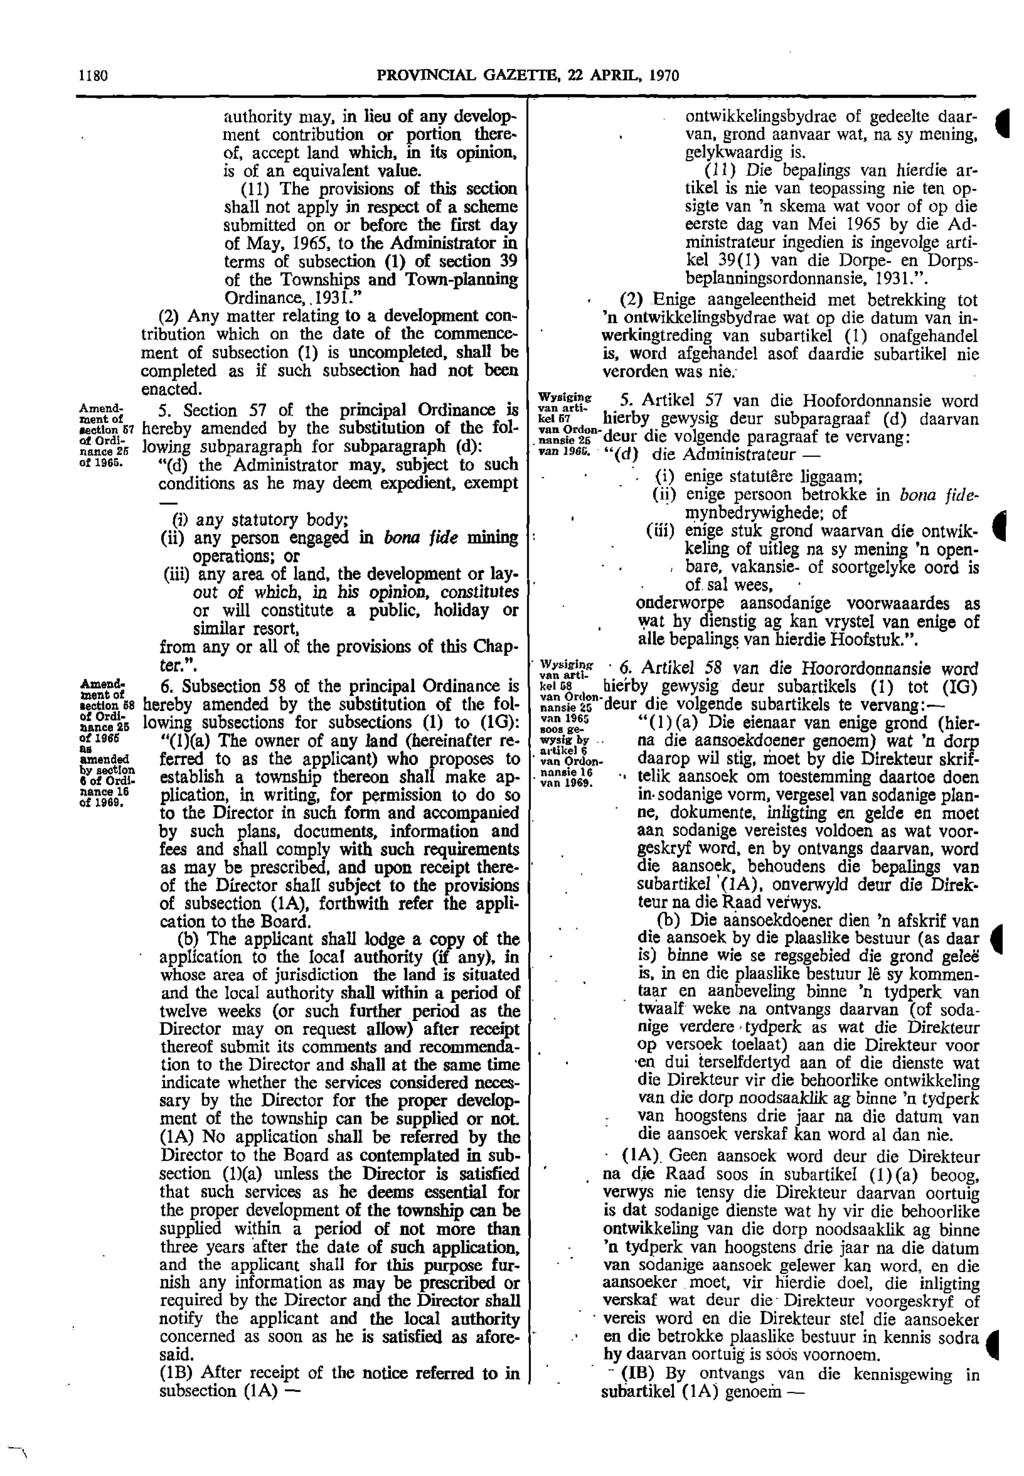 1180 PROVINCIAL GAZETTE 22 APRIL 1970 authority may in lieu of any develop ontwikkelingsbydrae of gedeelte daar A ment contribution or portion there van grond aanvaar wat na sy mening NI of accept